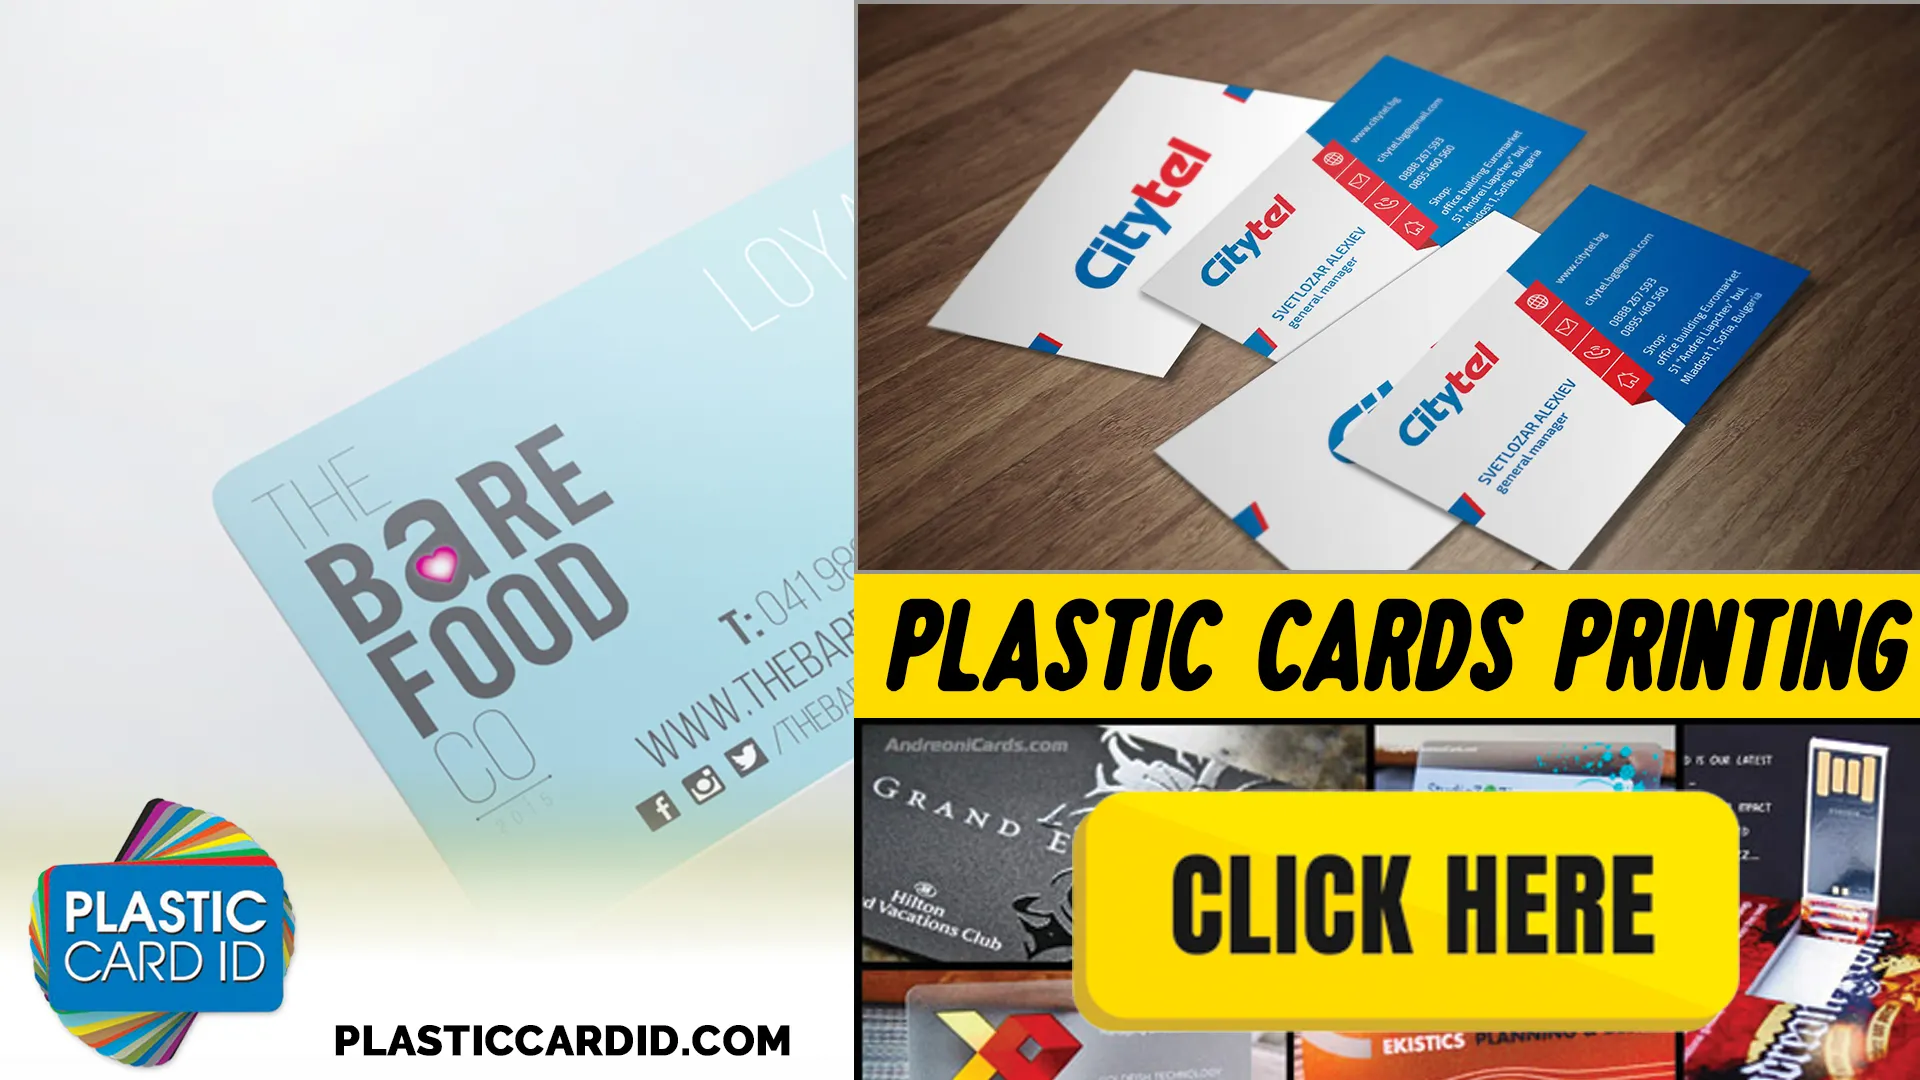 Finding the Best Value for Your Investment with Plastic Card ID
